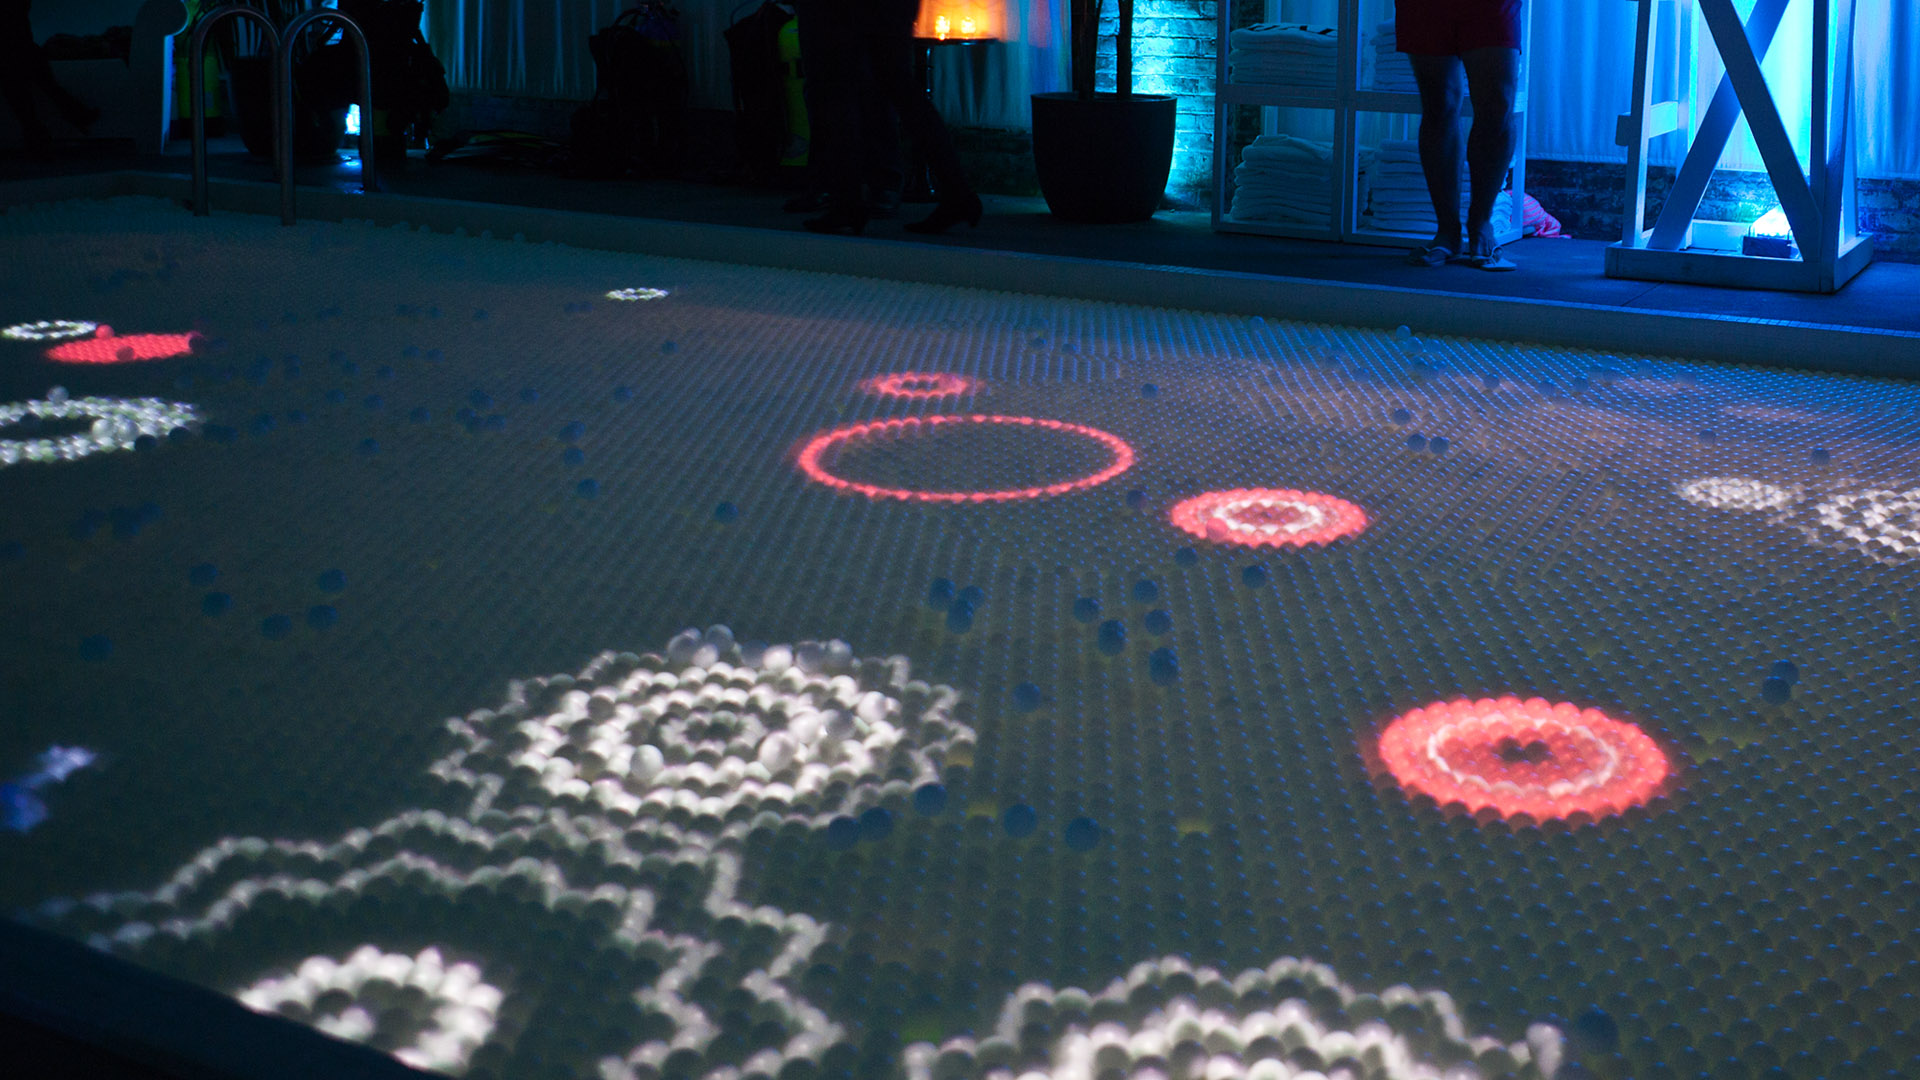 Computer generated audio reactive visuals projected on a pool covered in ping pong balls